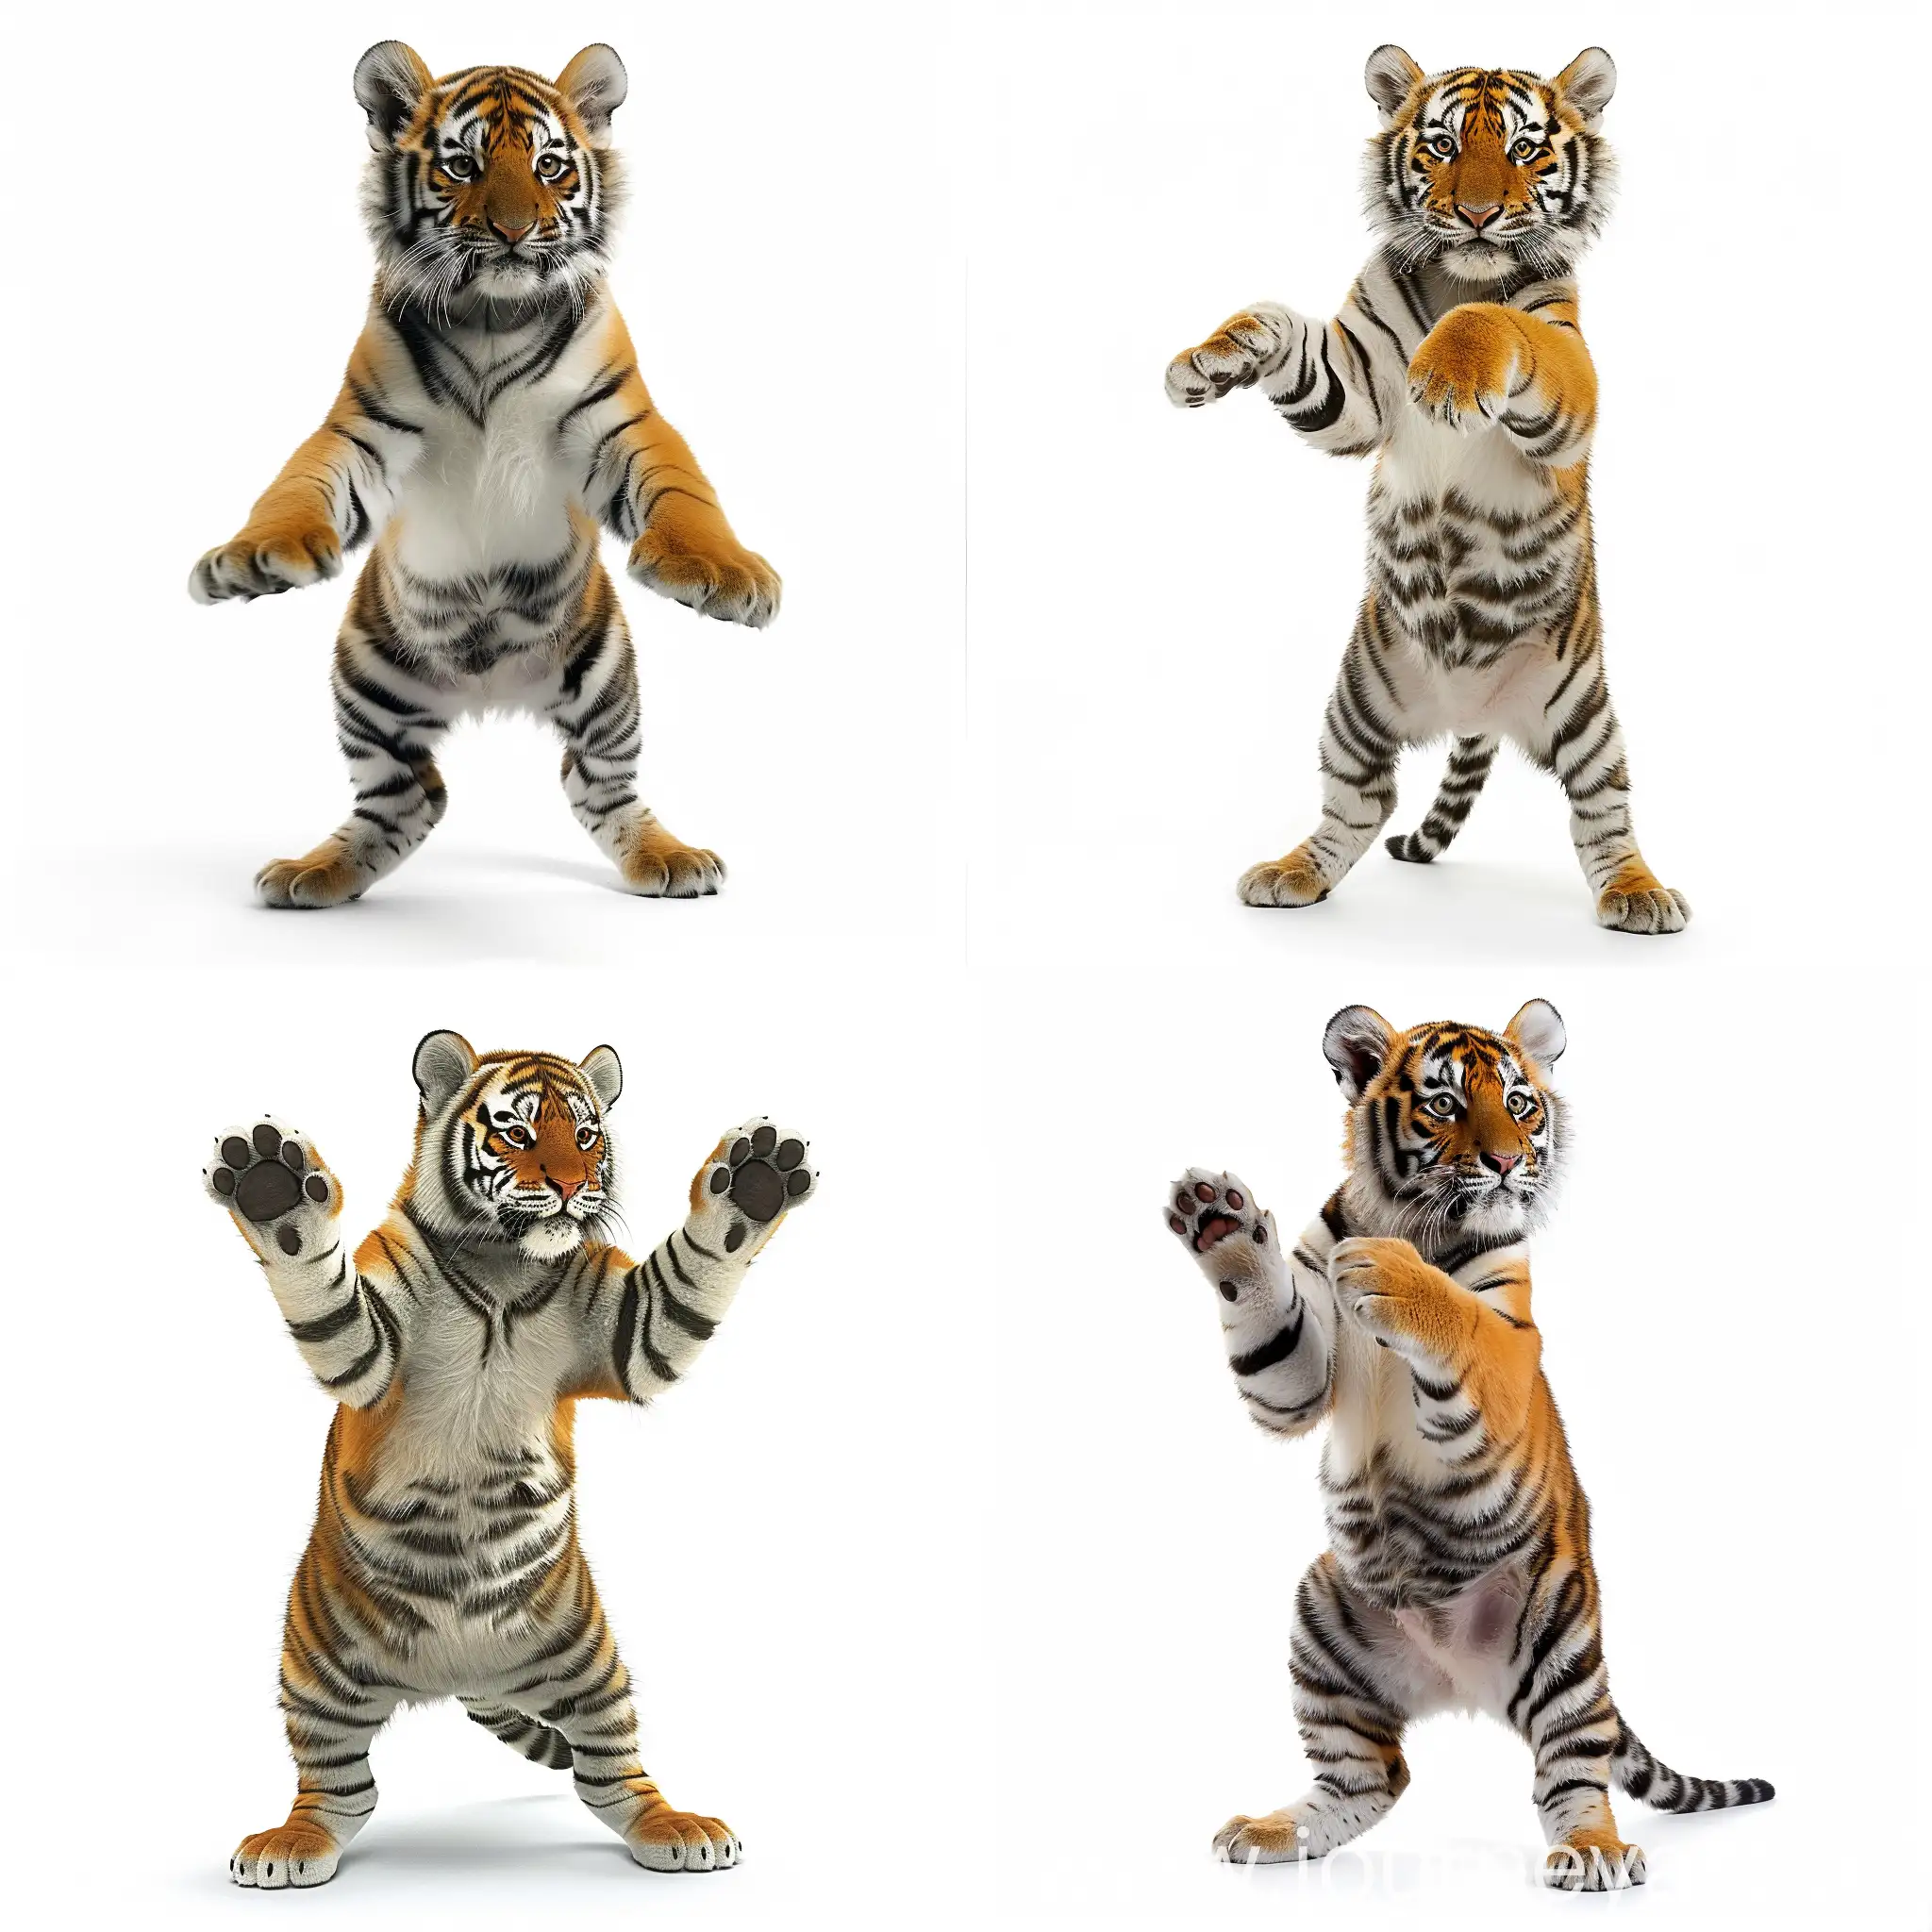 Anthropomorphic-Tiger-Cub-Cartoon-Character-Standing-Front-View